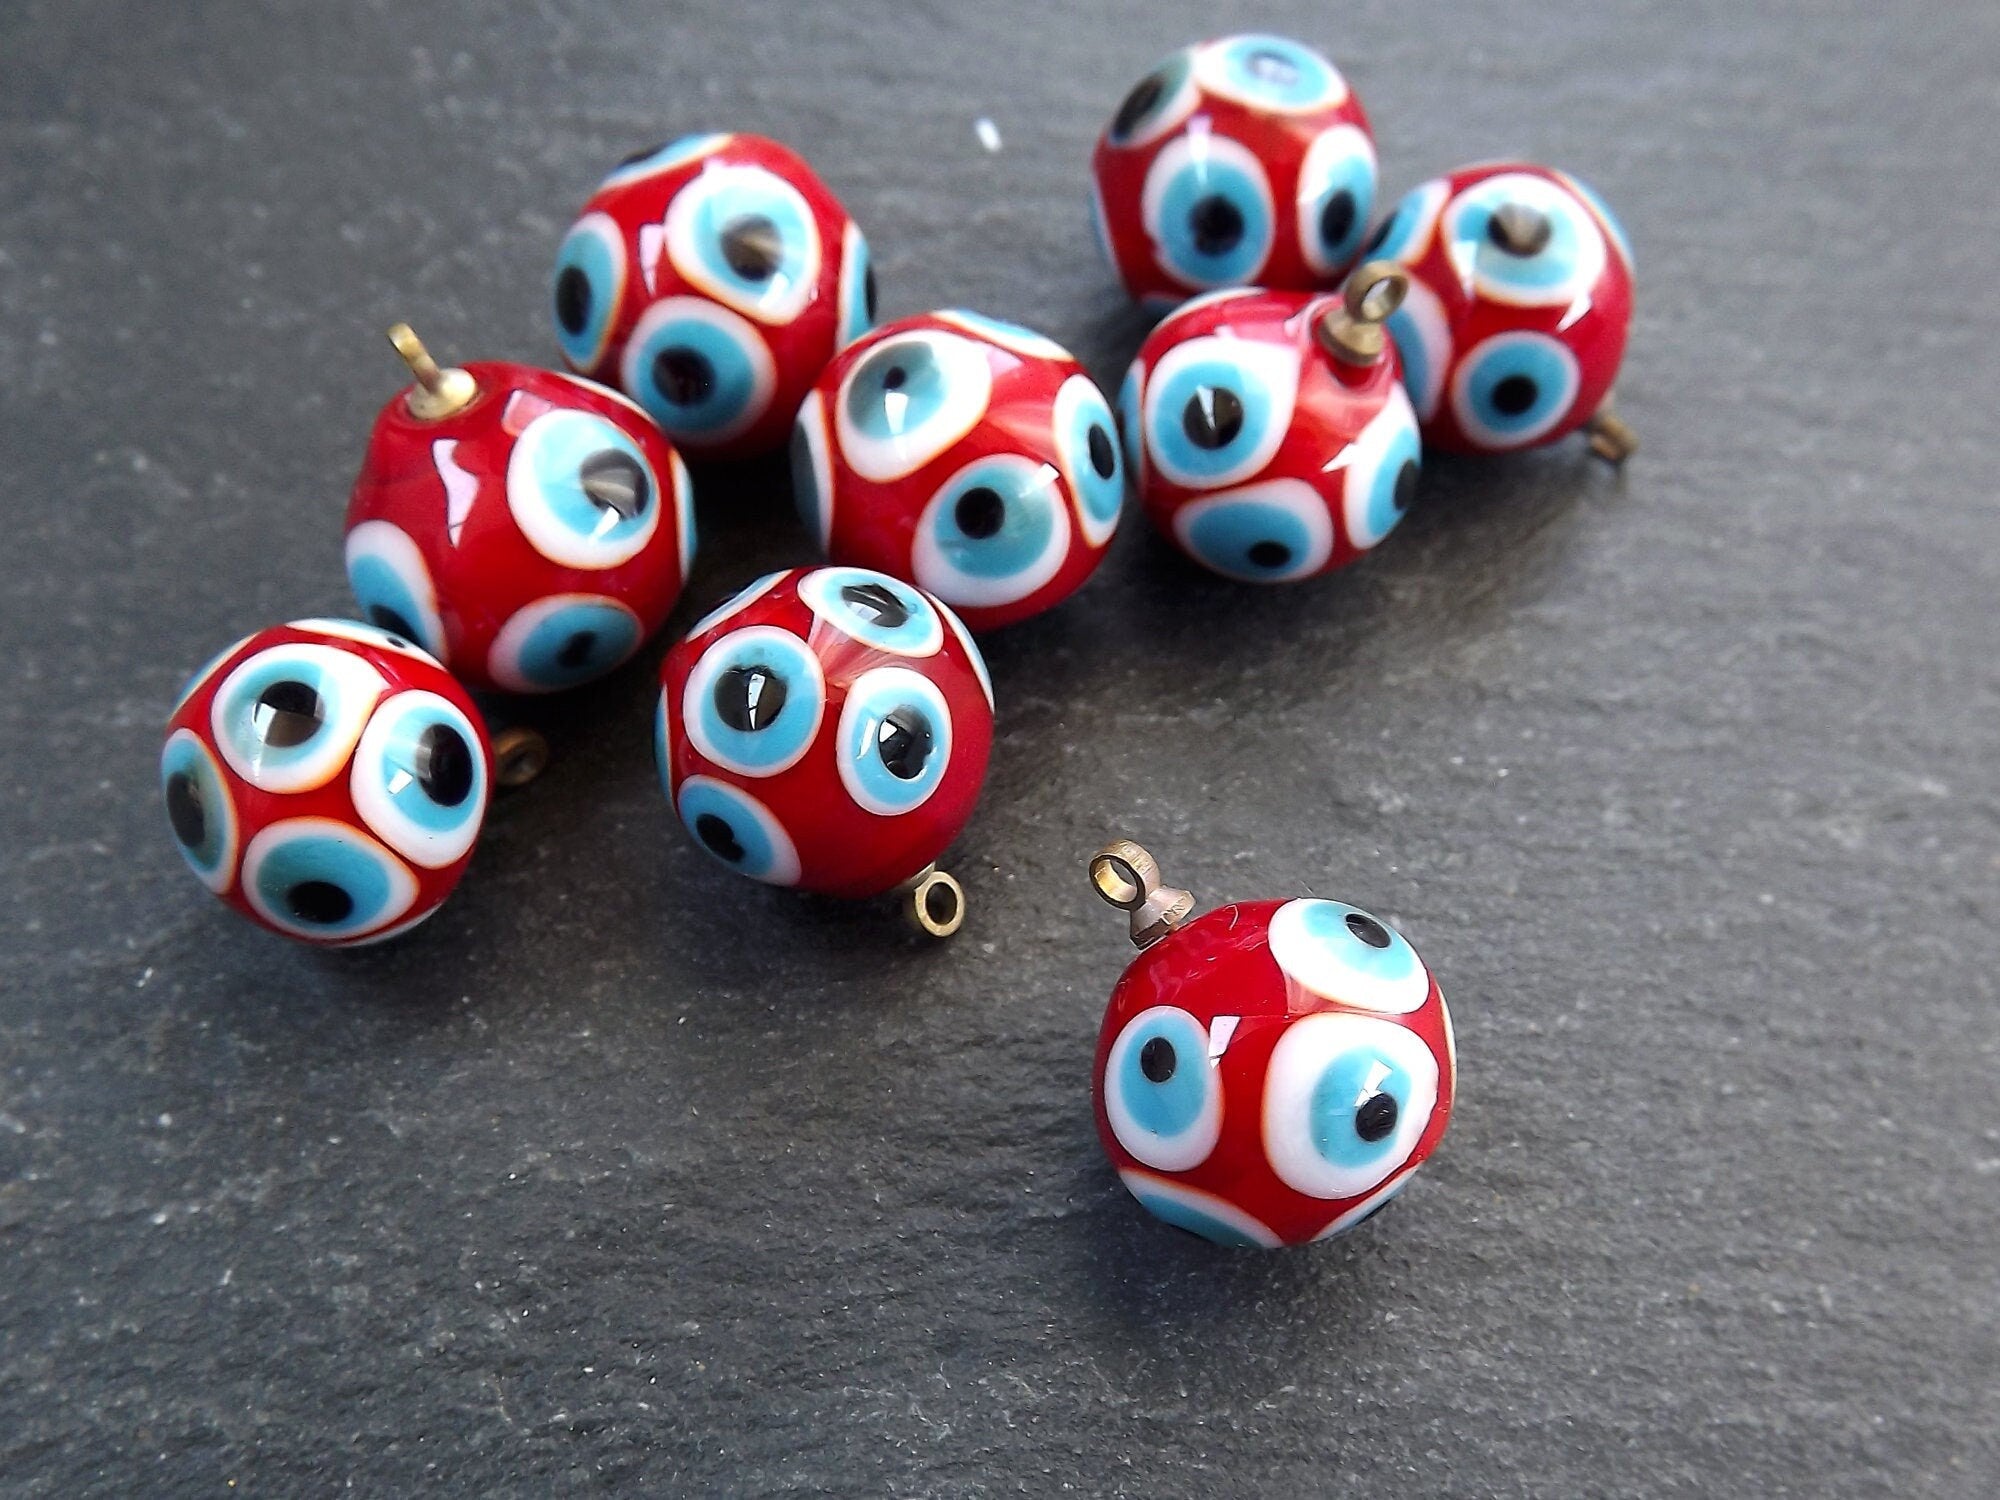 10 Red Evil Eye Beads Lampwork Glass Large Hole Beads by Smileyboy | Michaels